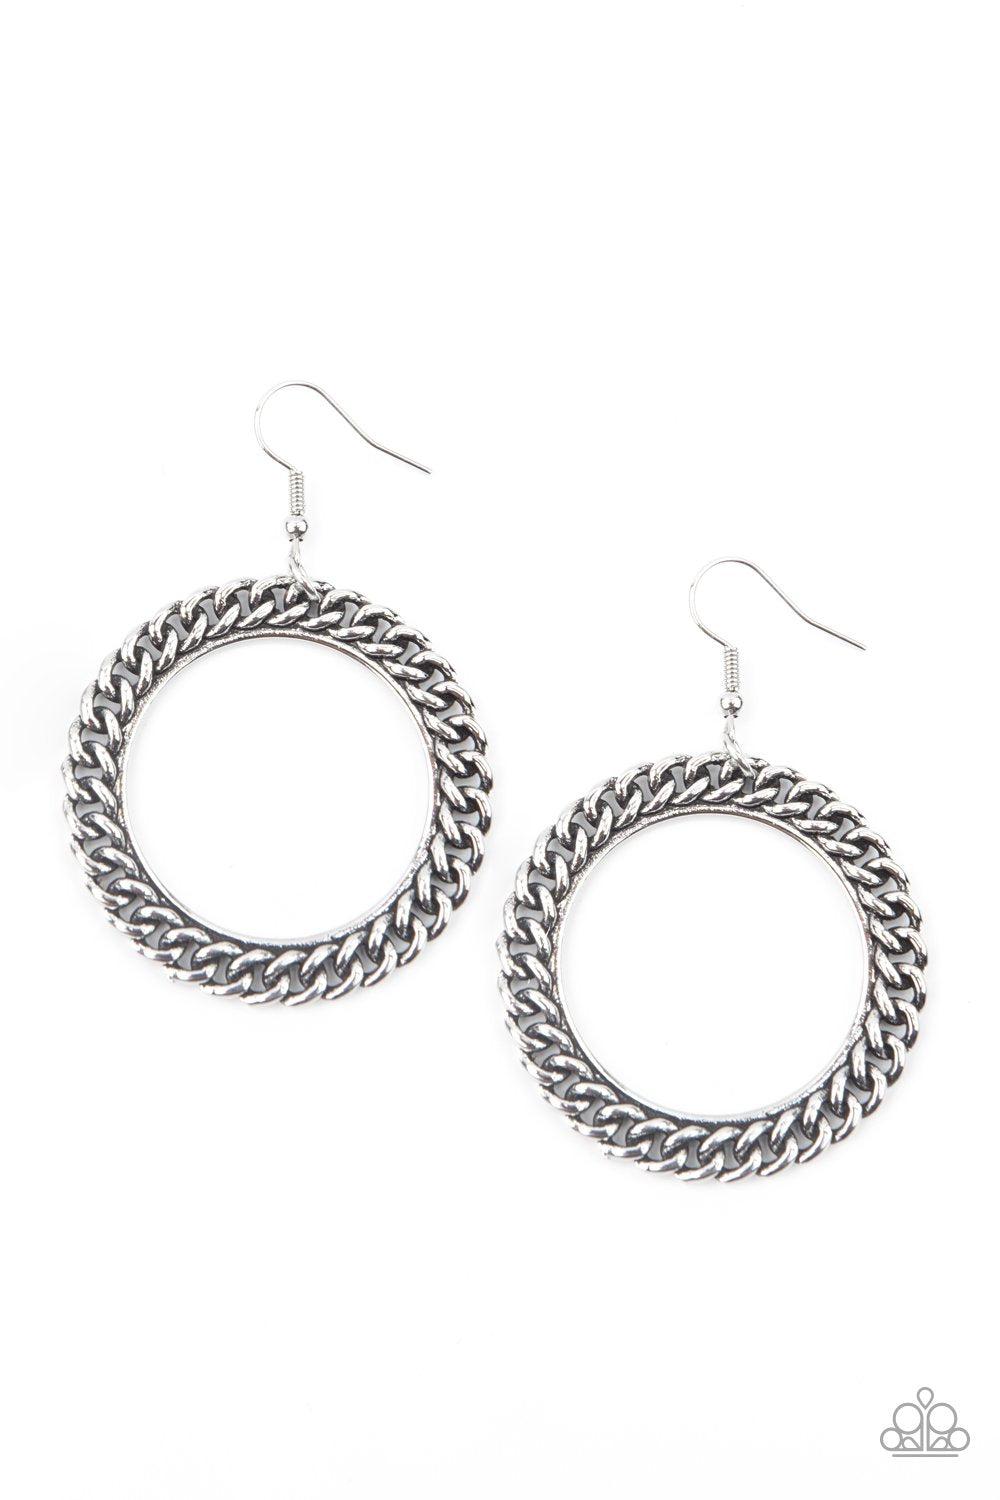 Above the RIMS Silver Earrings - Paparazzi Accessories- lightbox - CarasShop.com - $5 Jewelry by Cara Jewels